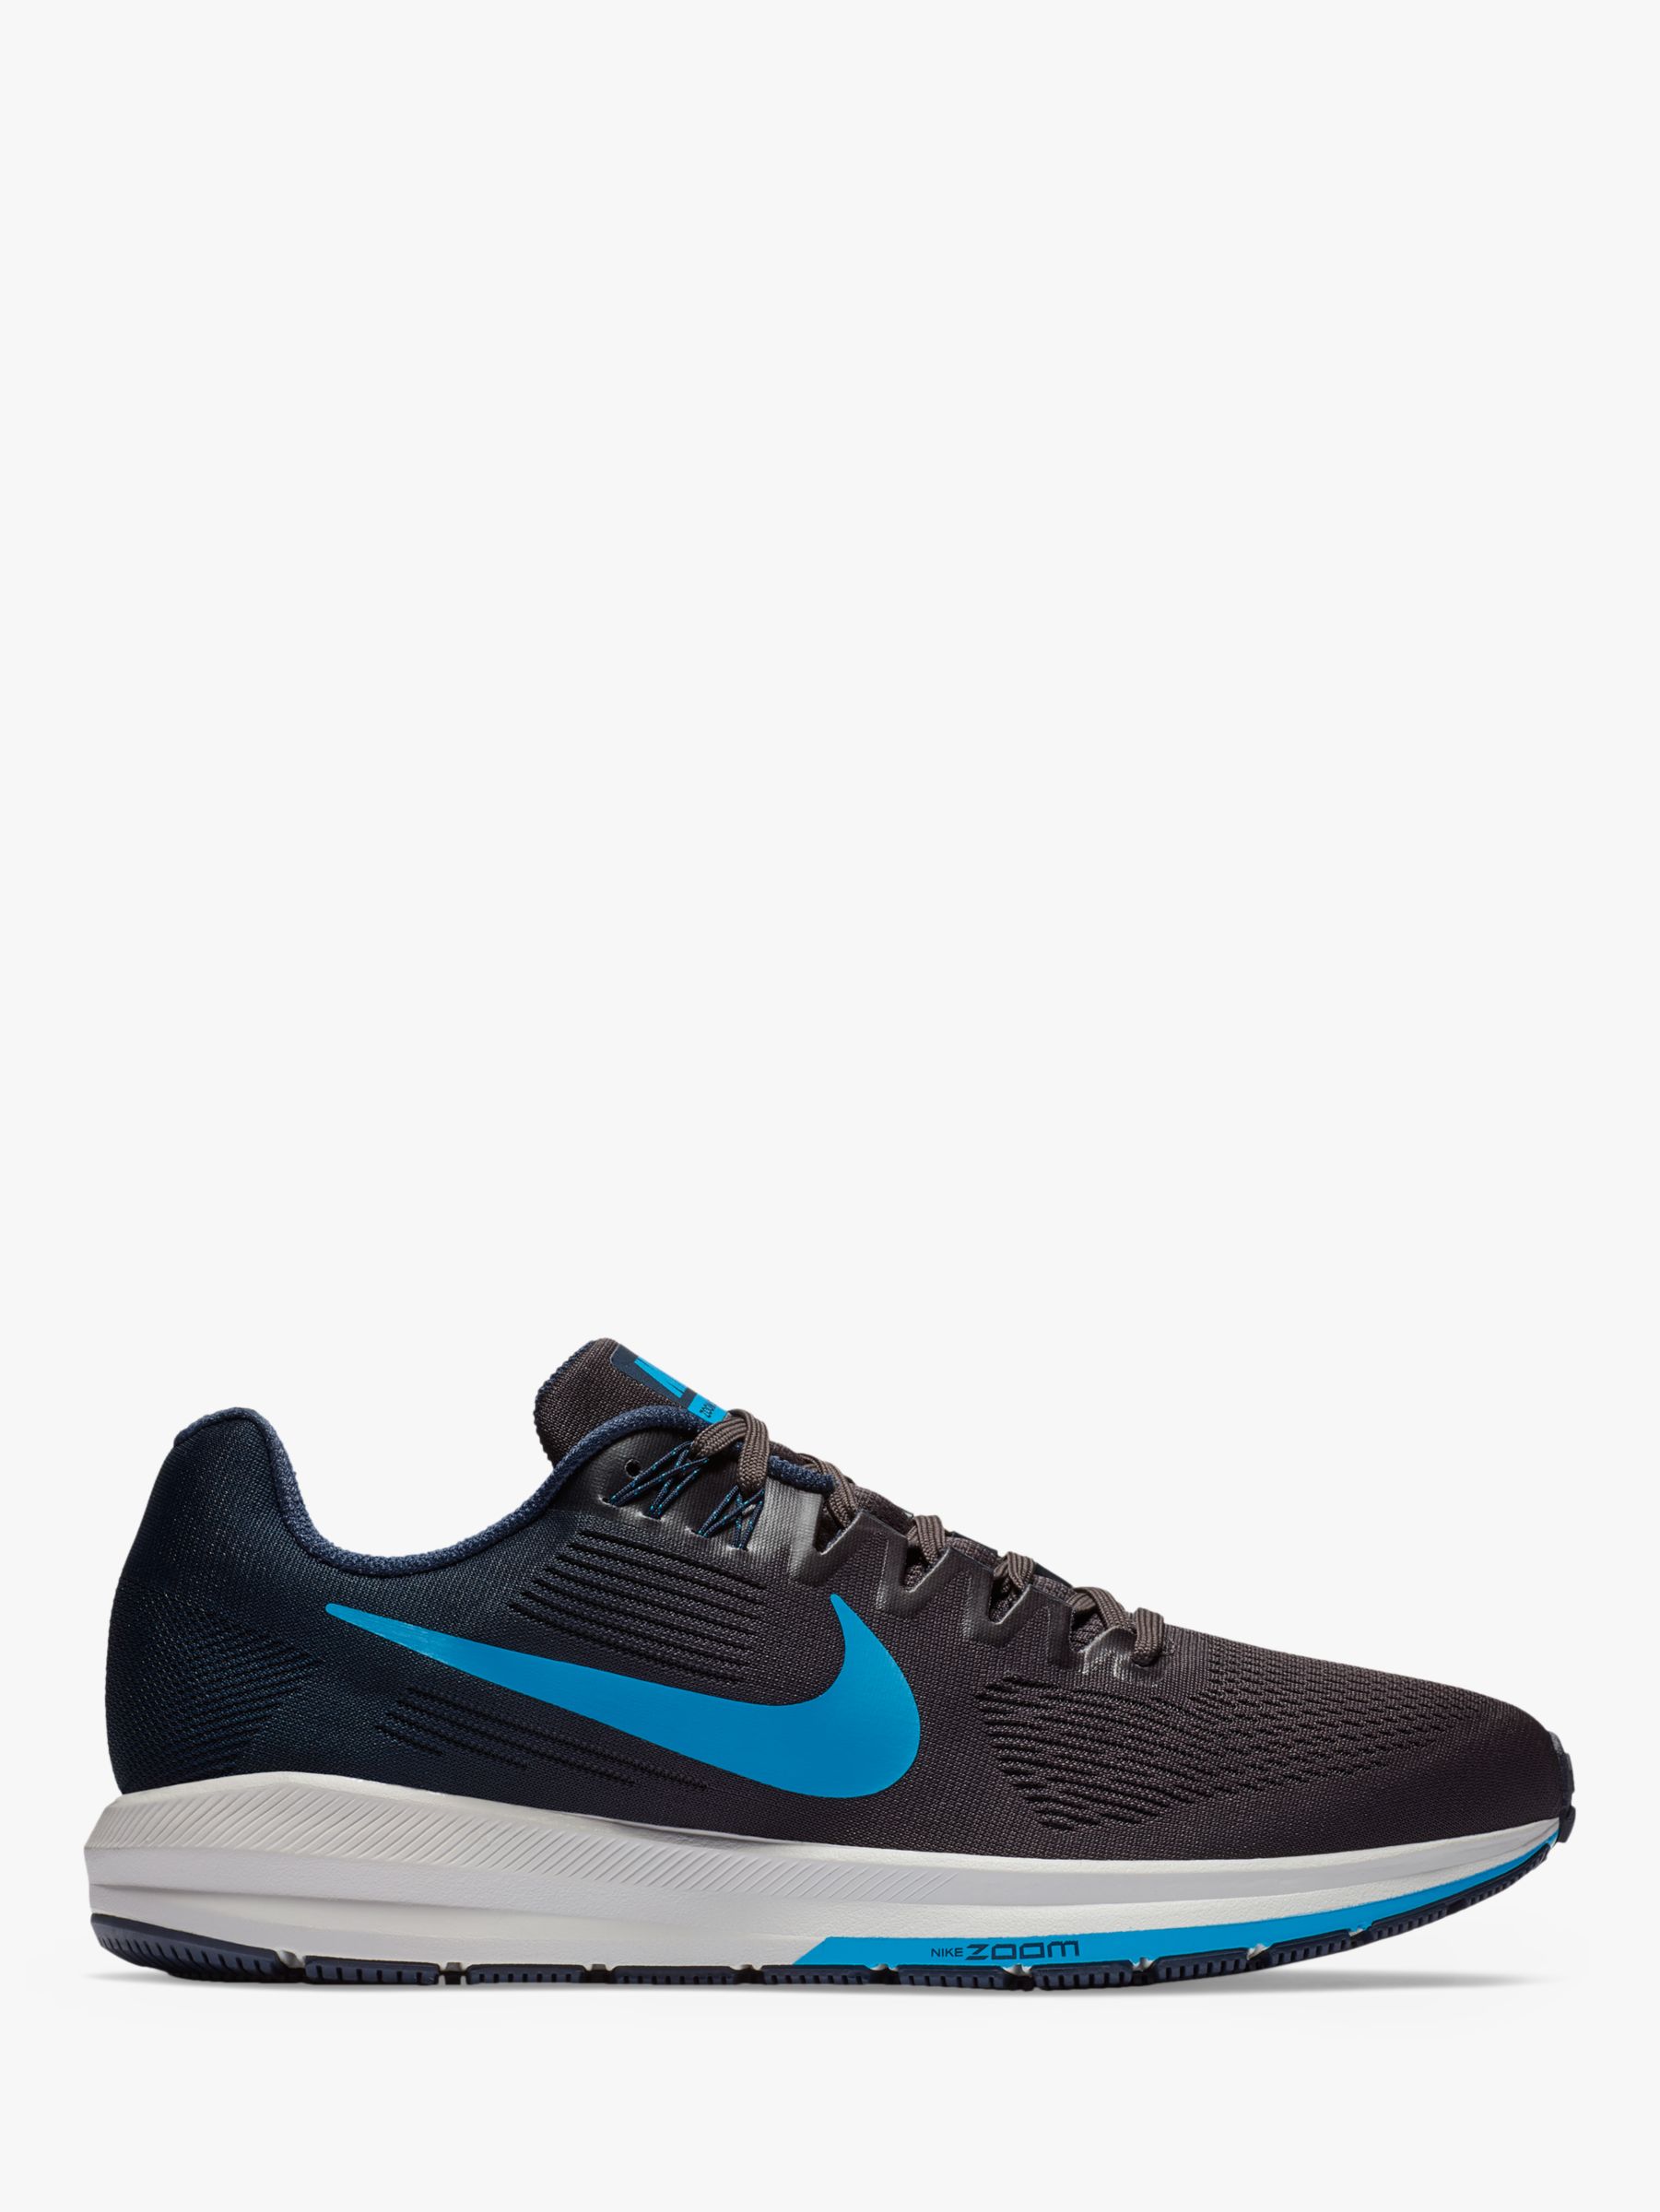 nike air zoom structure 21 men's running shoe